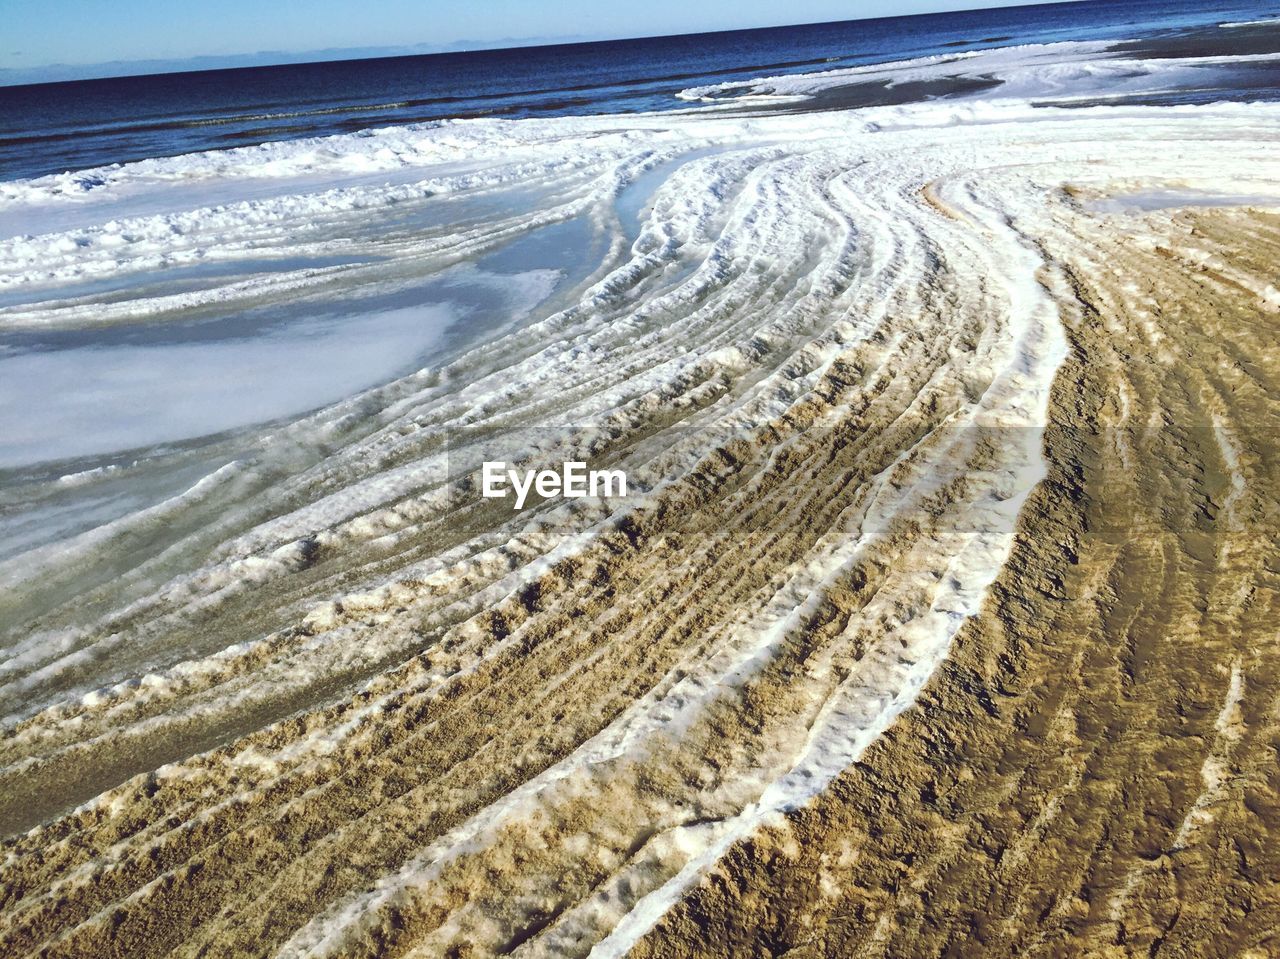 Aerial view of snow covered beach